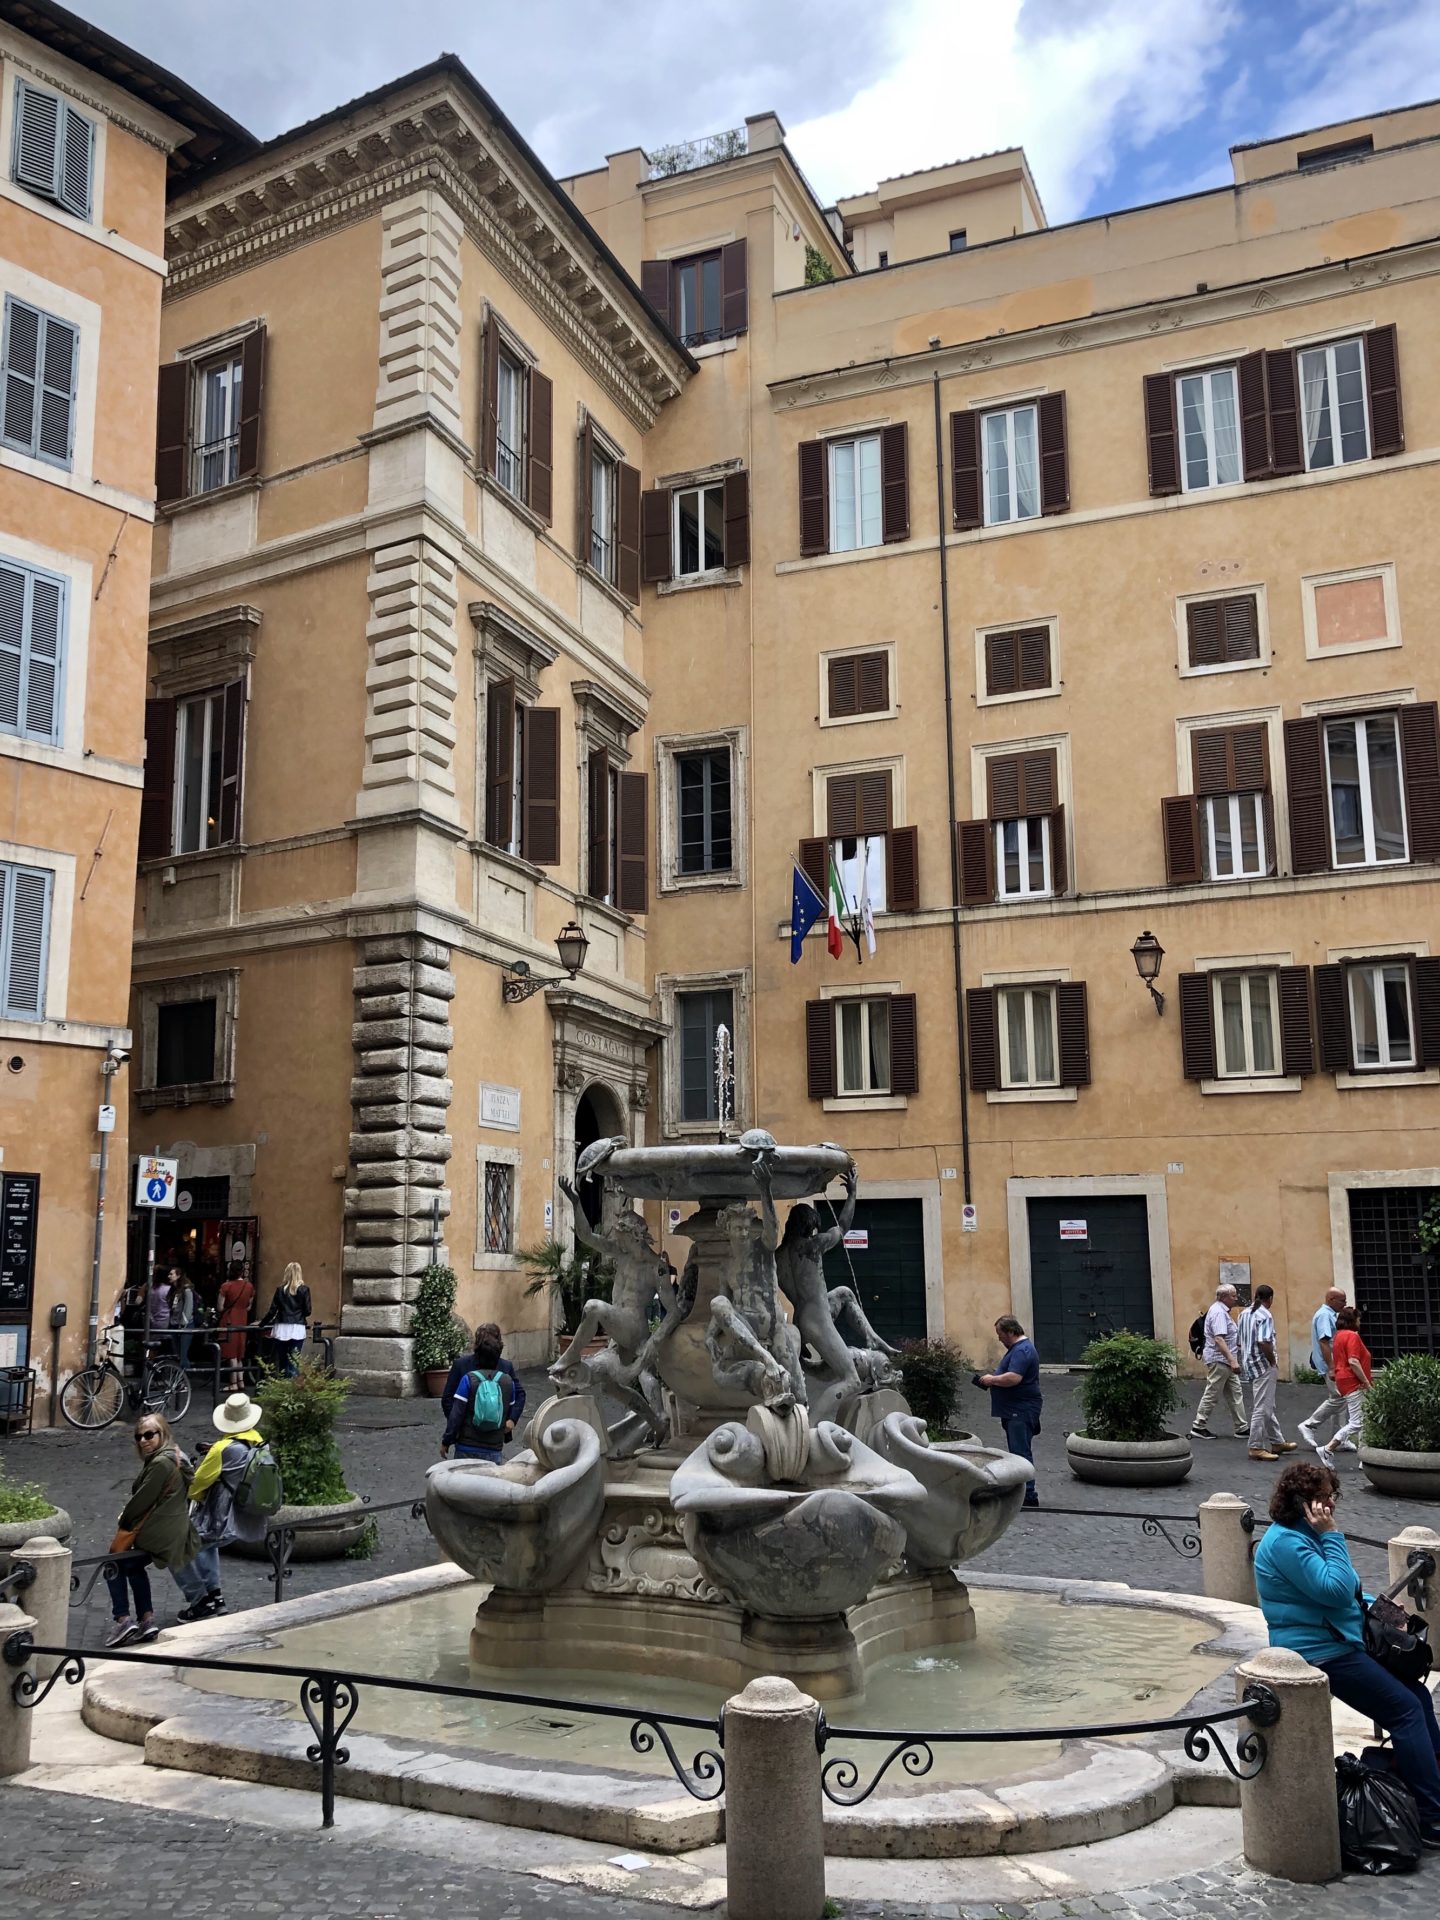 The Turtle fountain is in Piazza Mattei and was one of many fountains in Rome it is also said to be the first drinkable Jewish fountain in the area. 